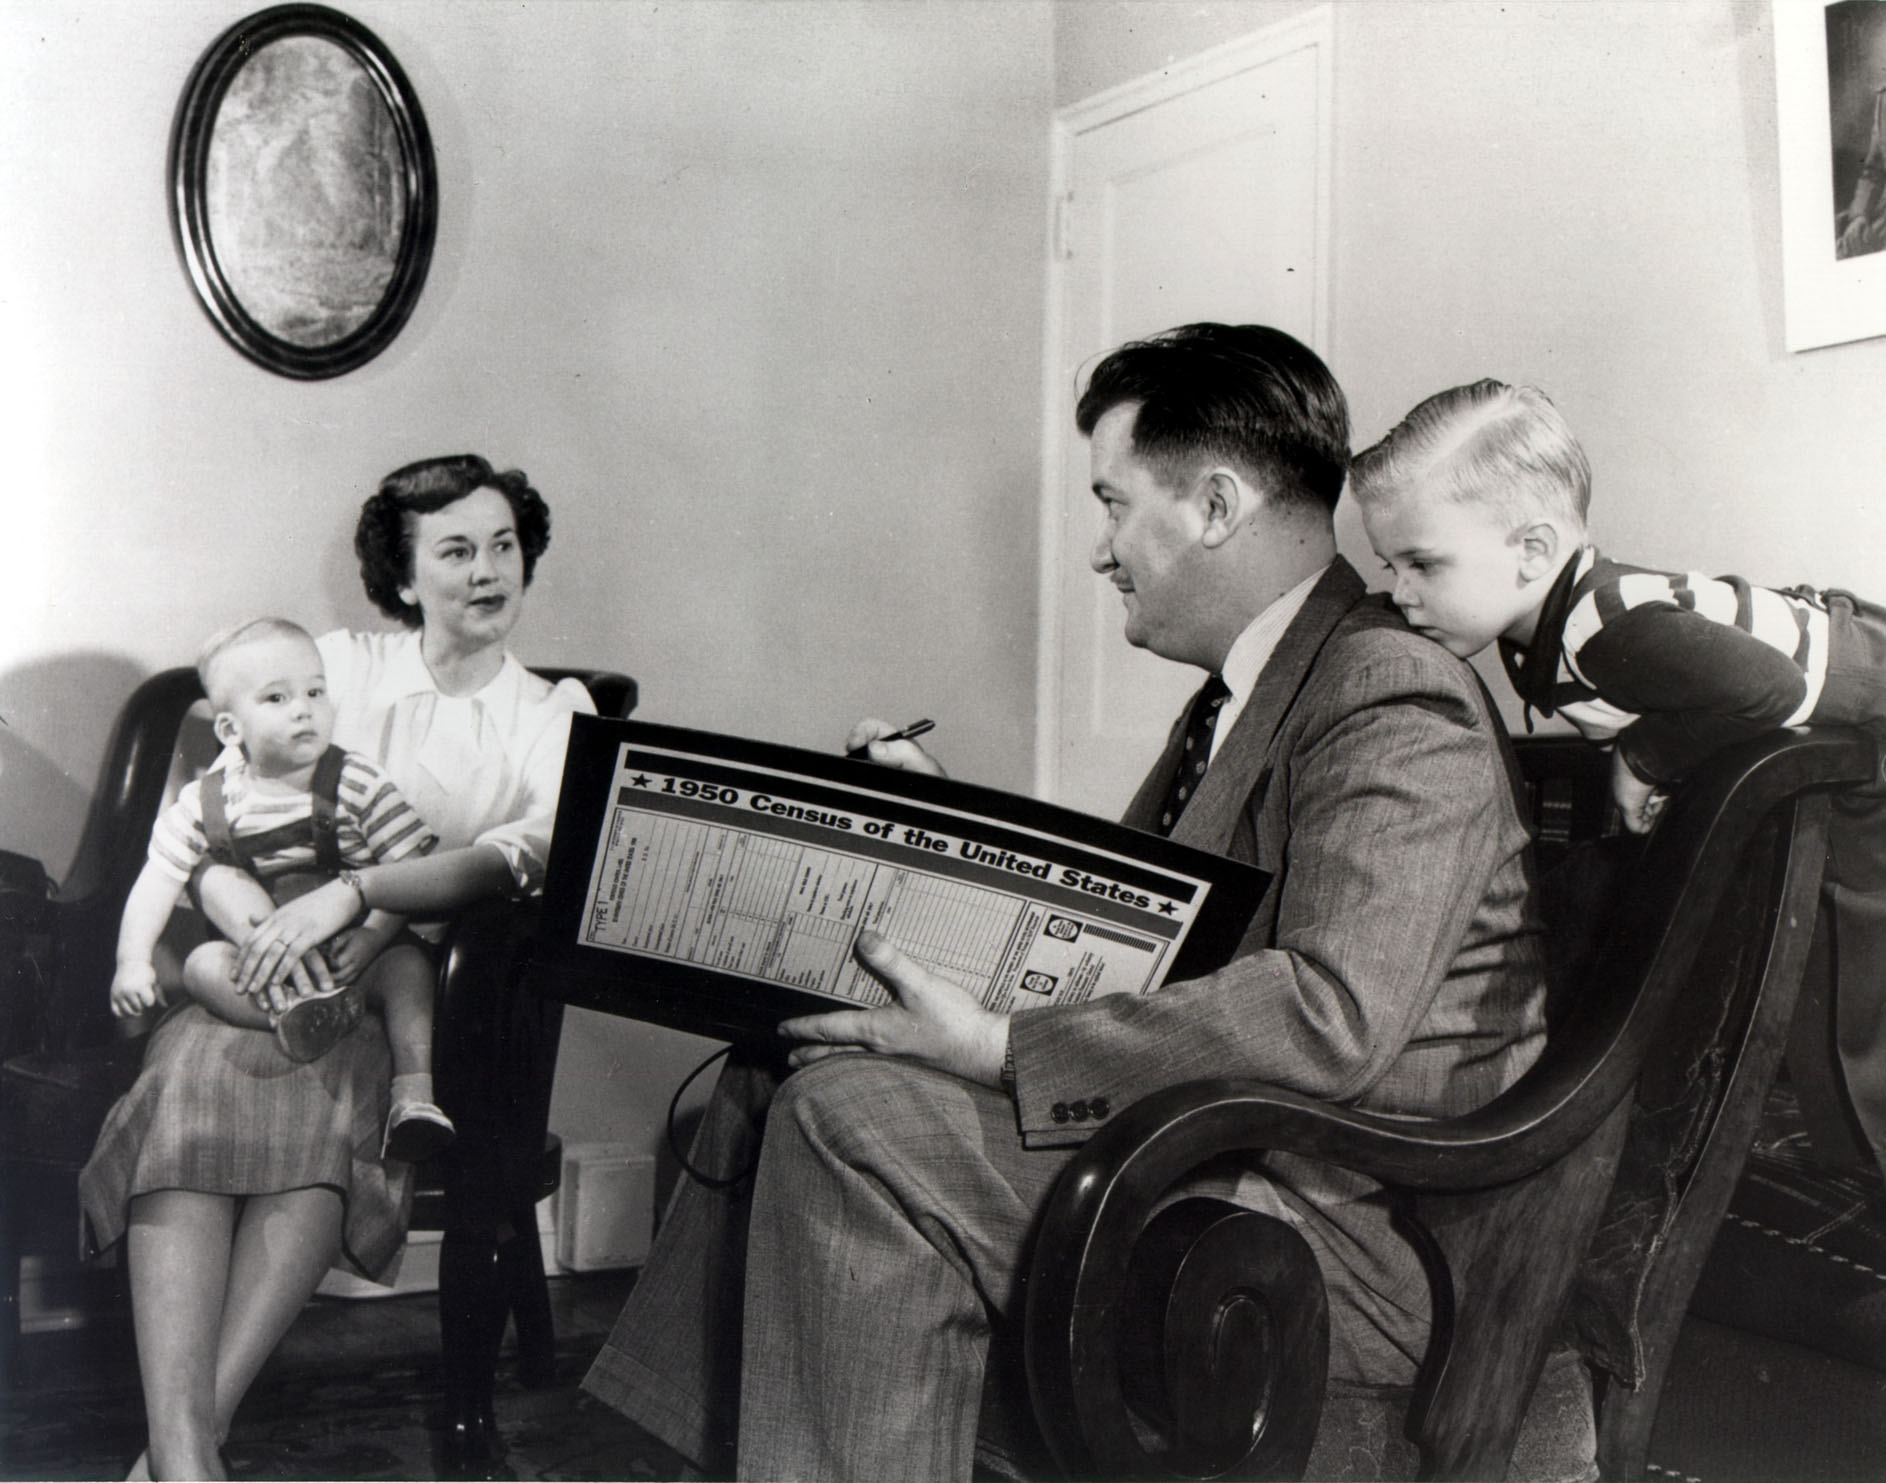 Census enumerator in 1950 interviewing a family